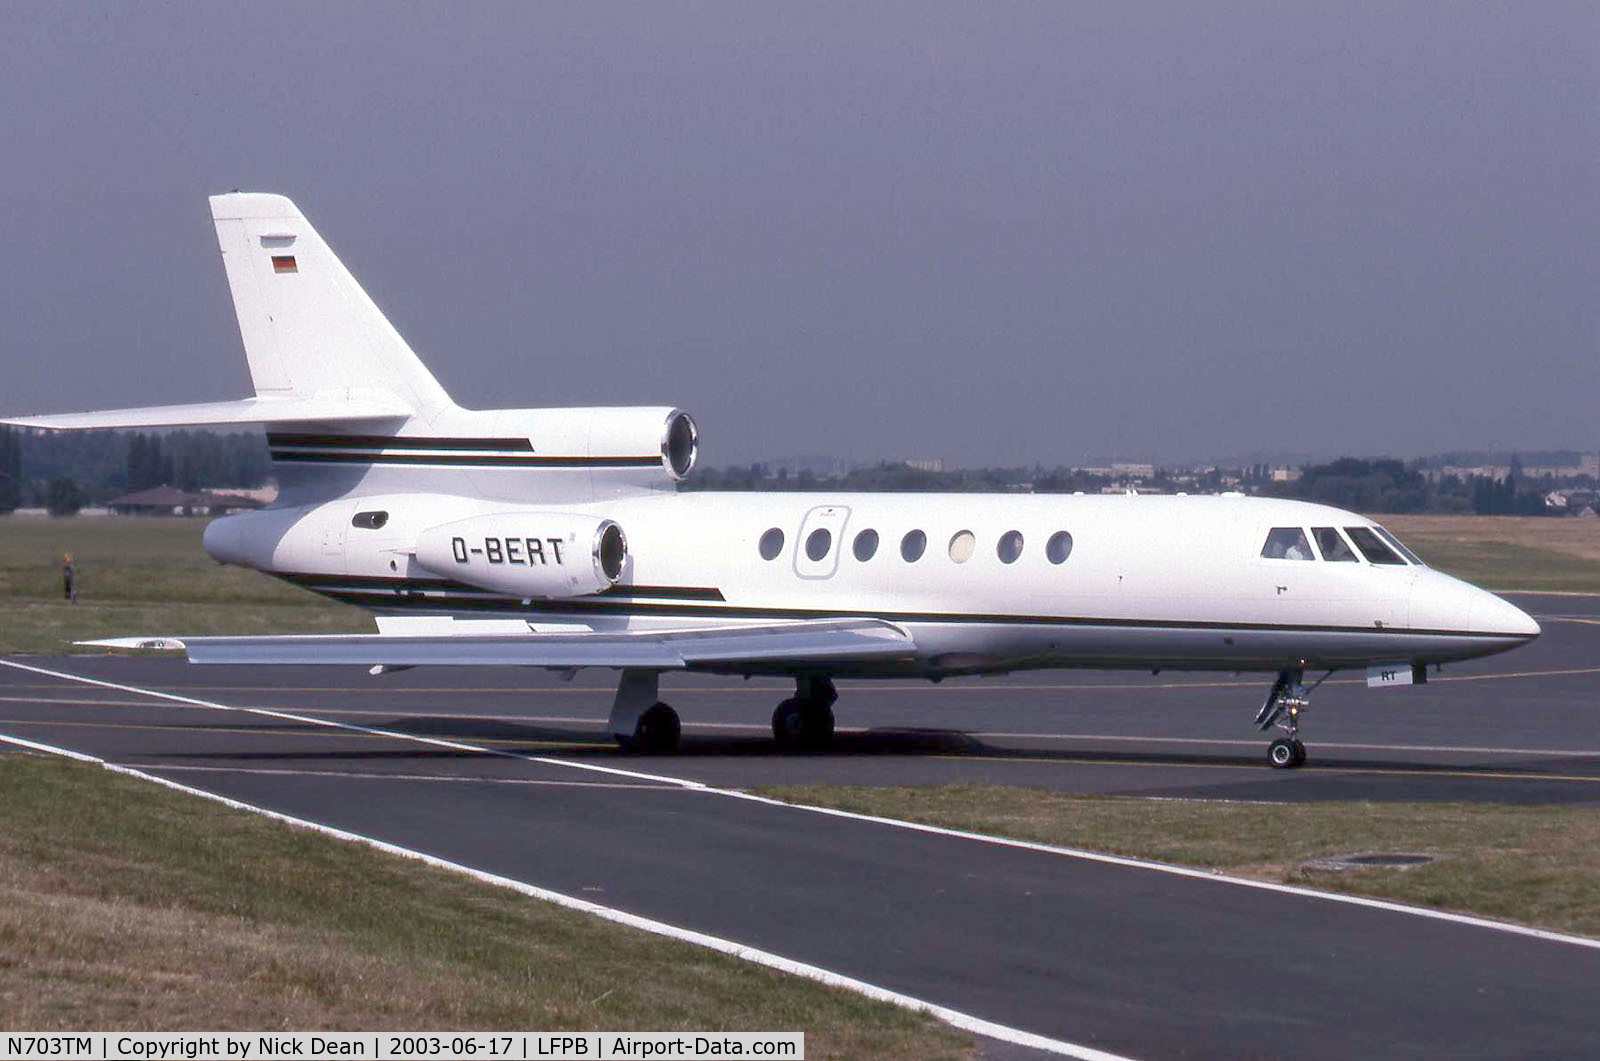 N703TM, 1991 Dassault-breguet Falcon 50 C/N 218, Seen here at Le Bourget as D-BERT now carried on a 2000EX this 50 is currently registered as posted N703TM